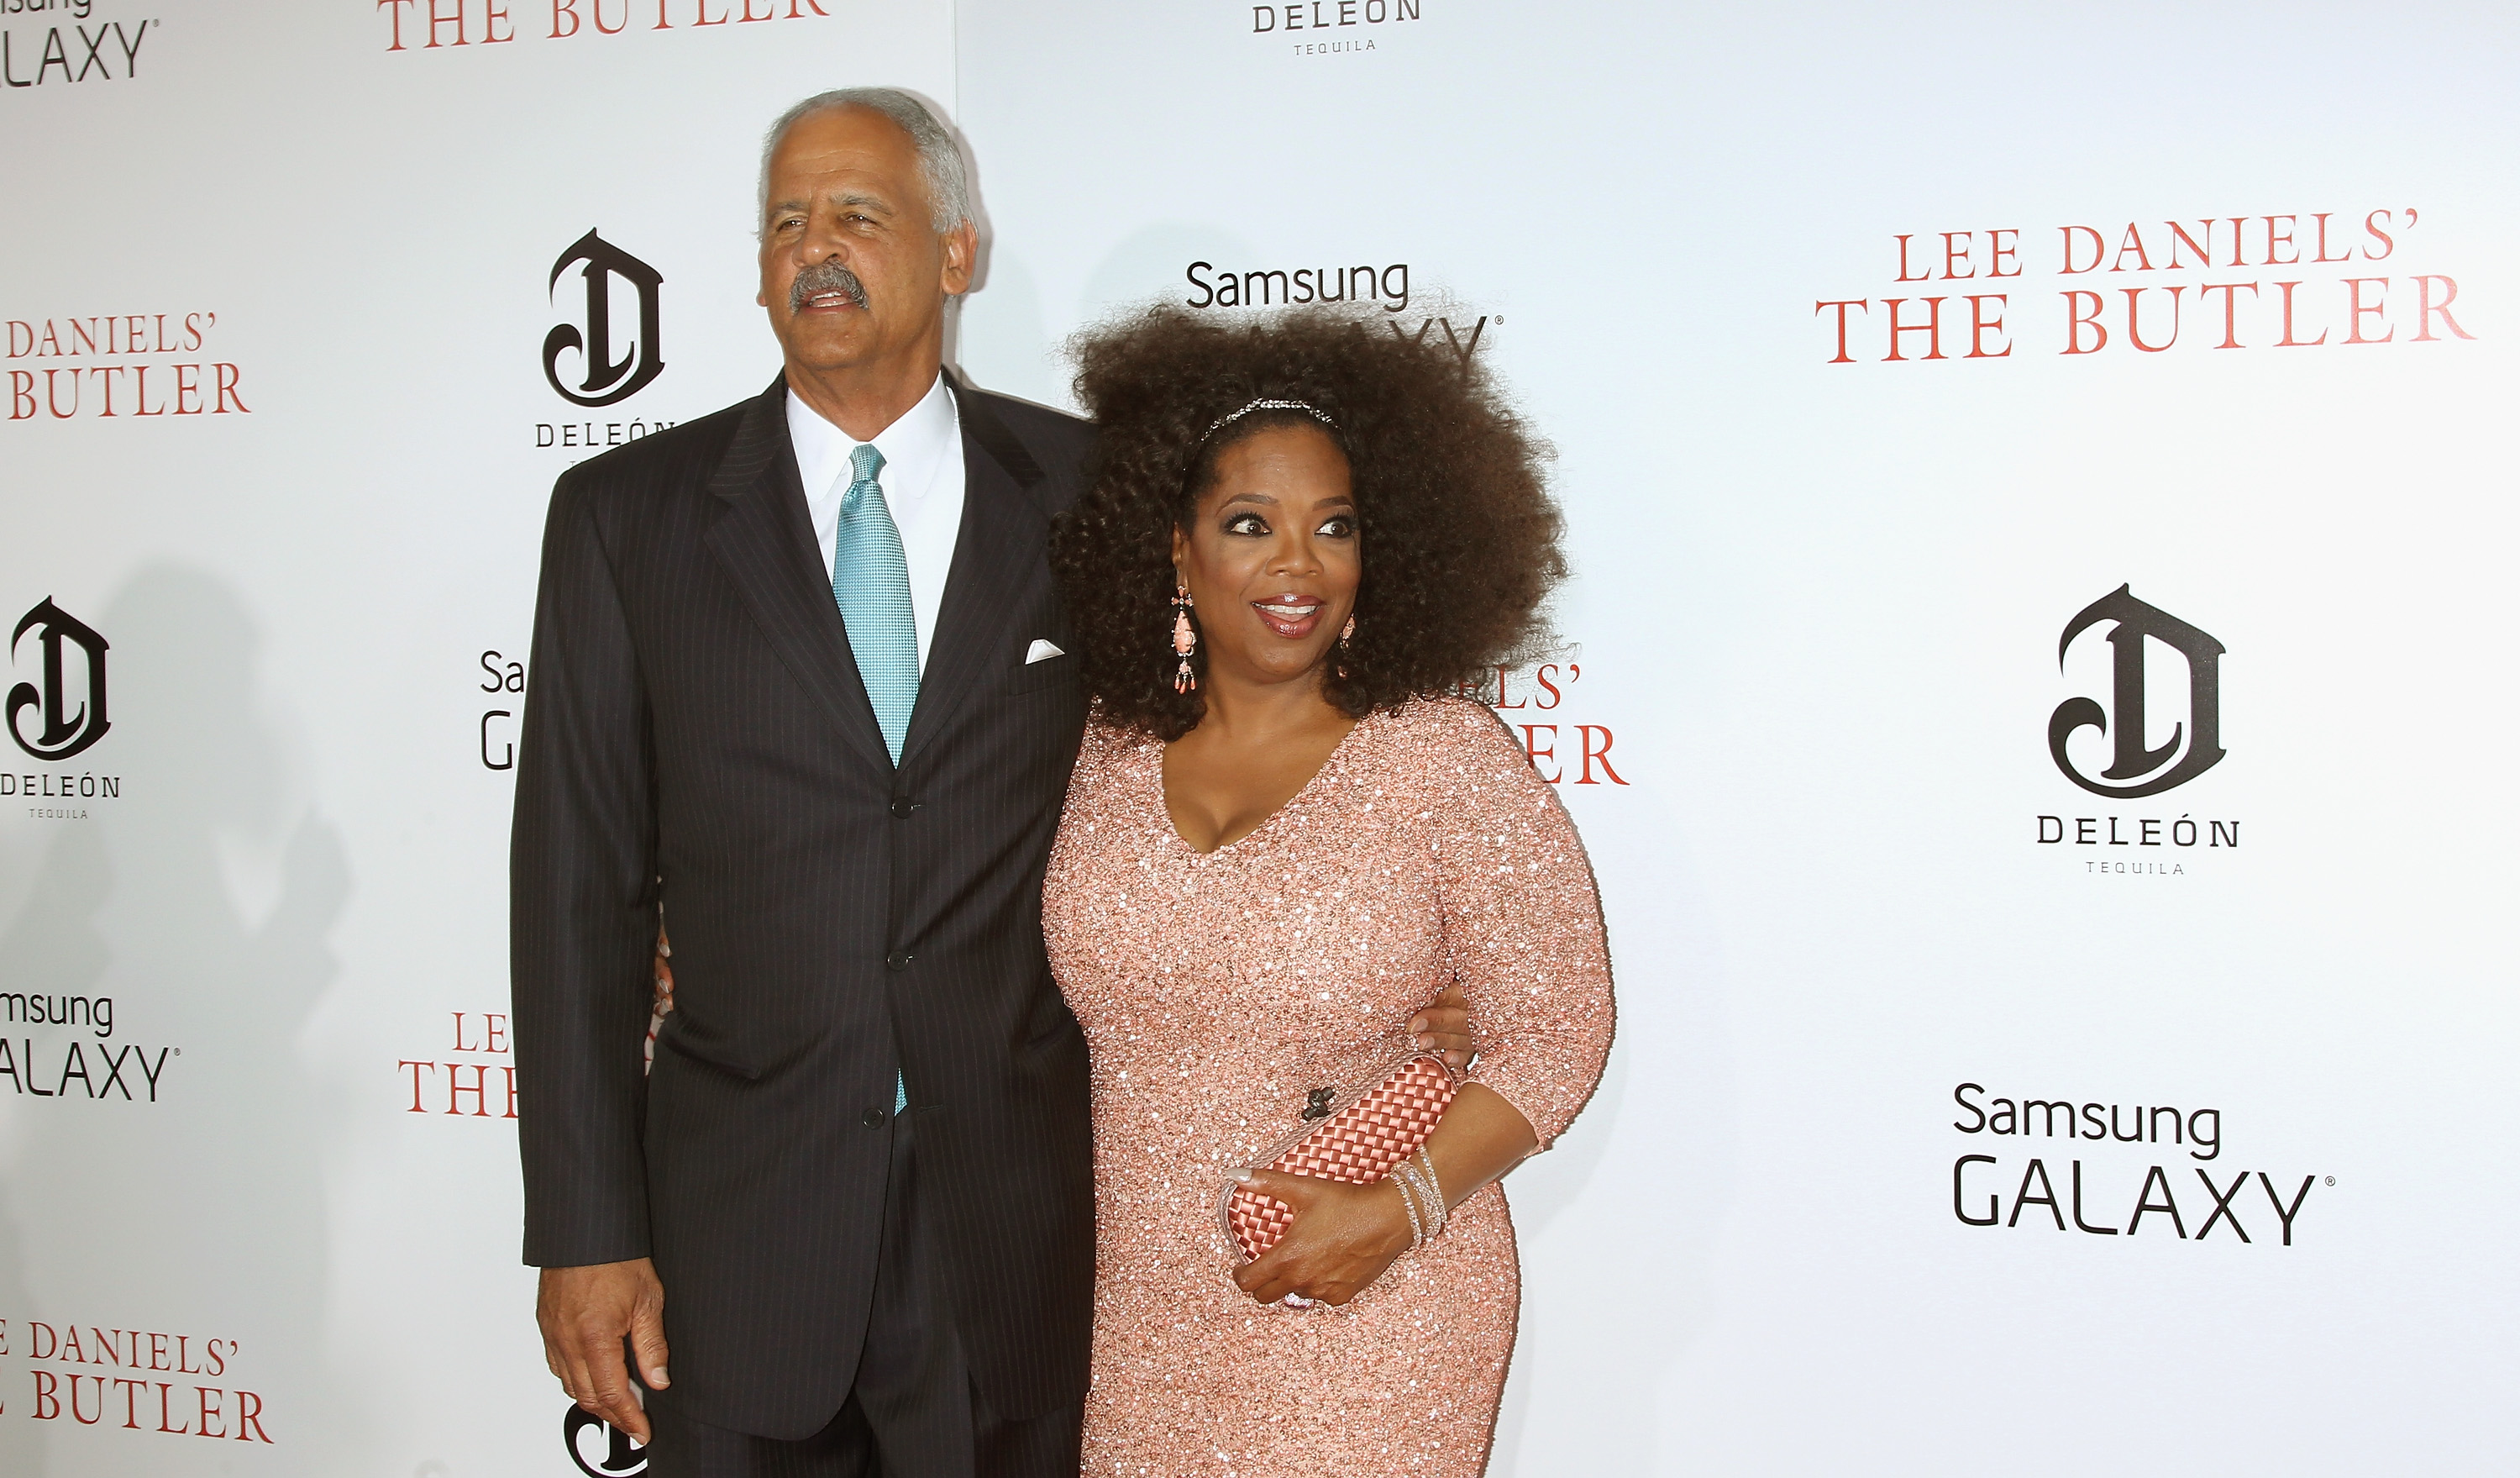 Stedman Graham and Oprah Winfrey in New York City on August 5, 2013 | Source: Getty Images